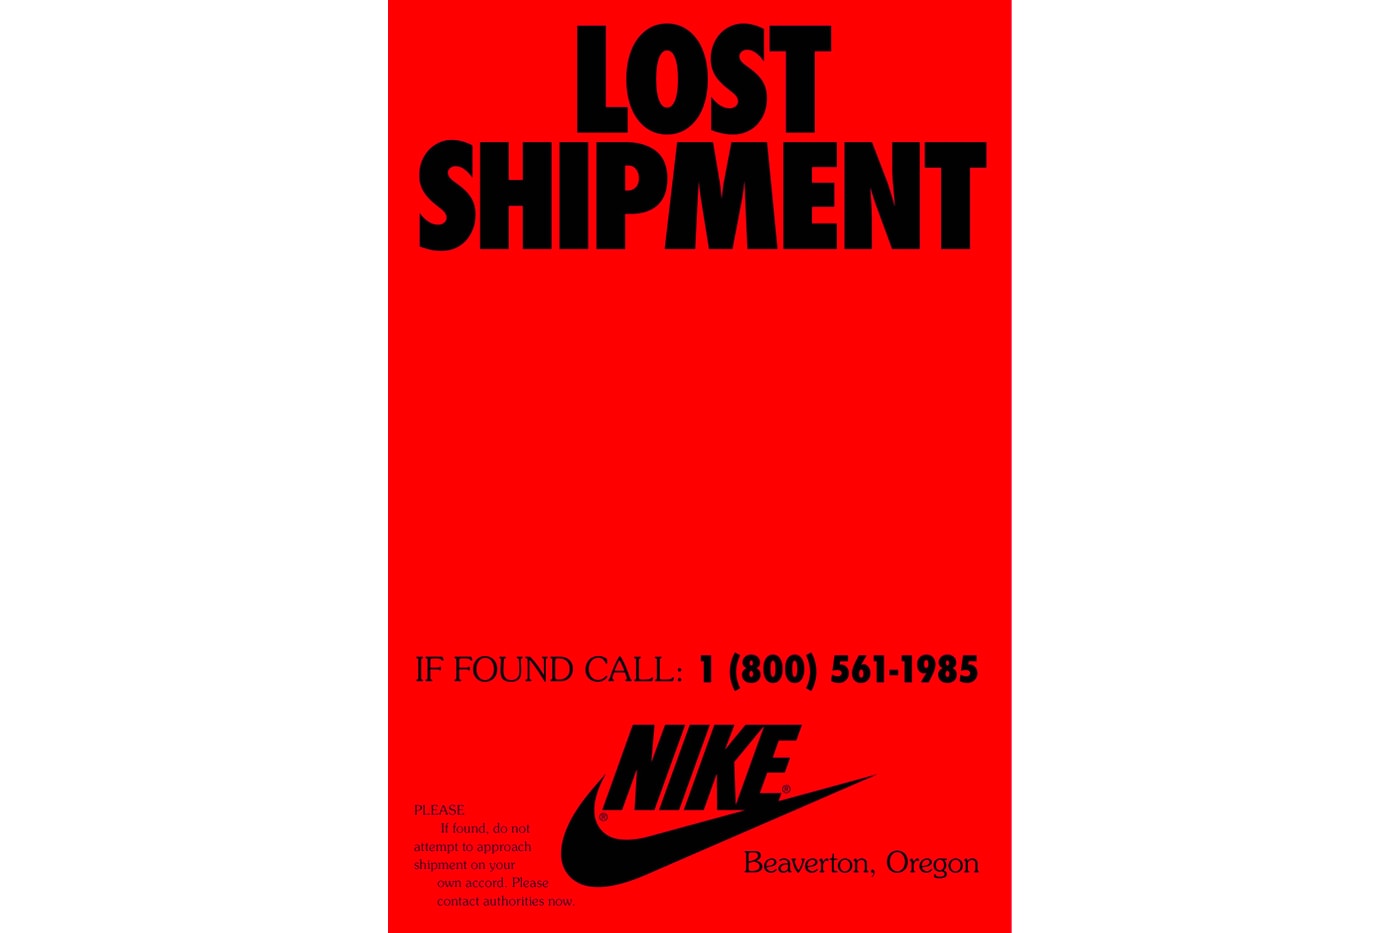 Nike 1985 Lost Shipment Campaign Phone Number 1 800 561 1985 Launch Release info Date truck video missing